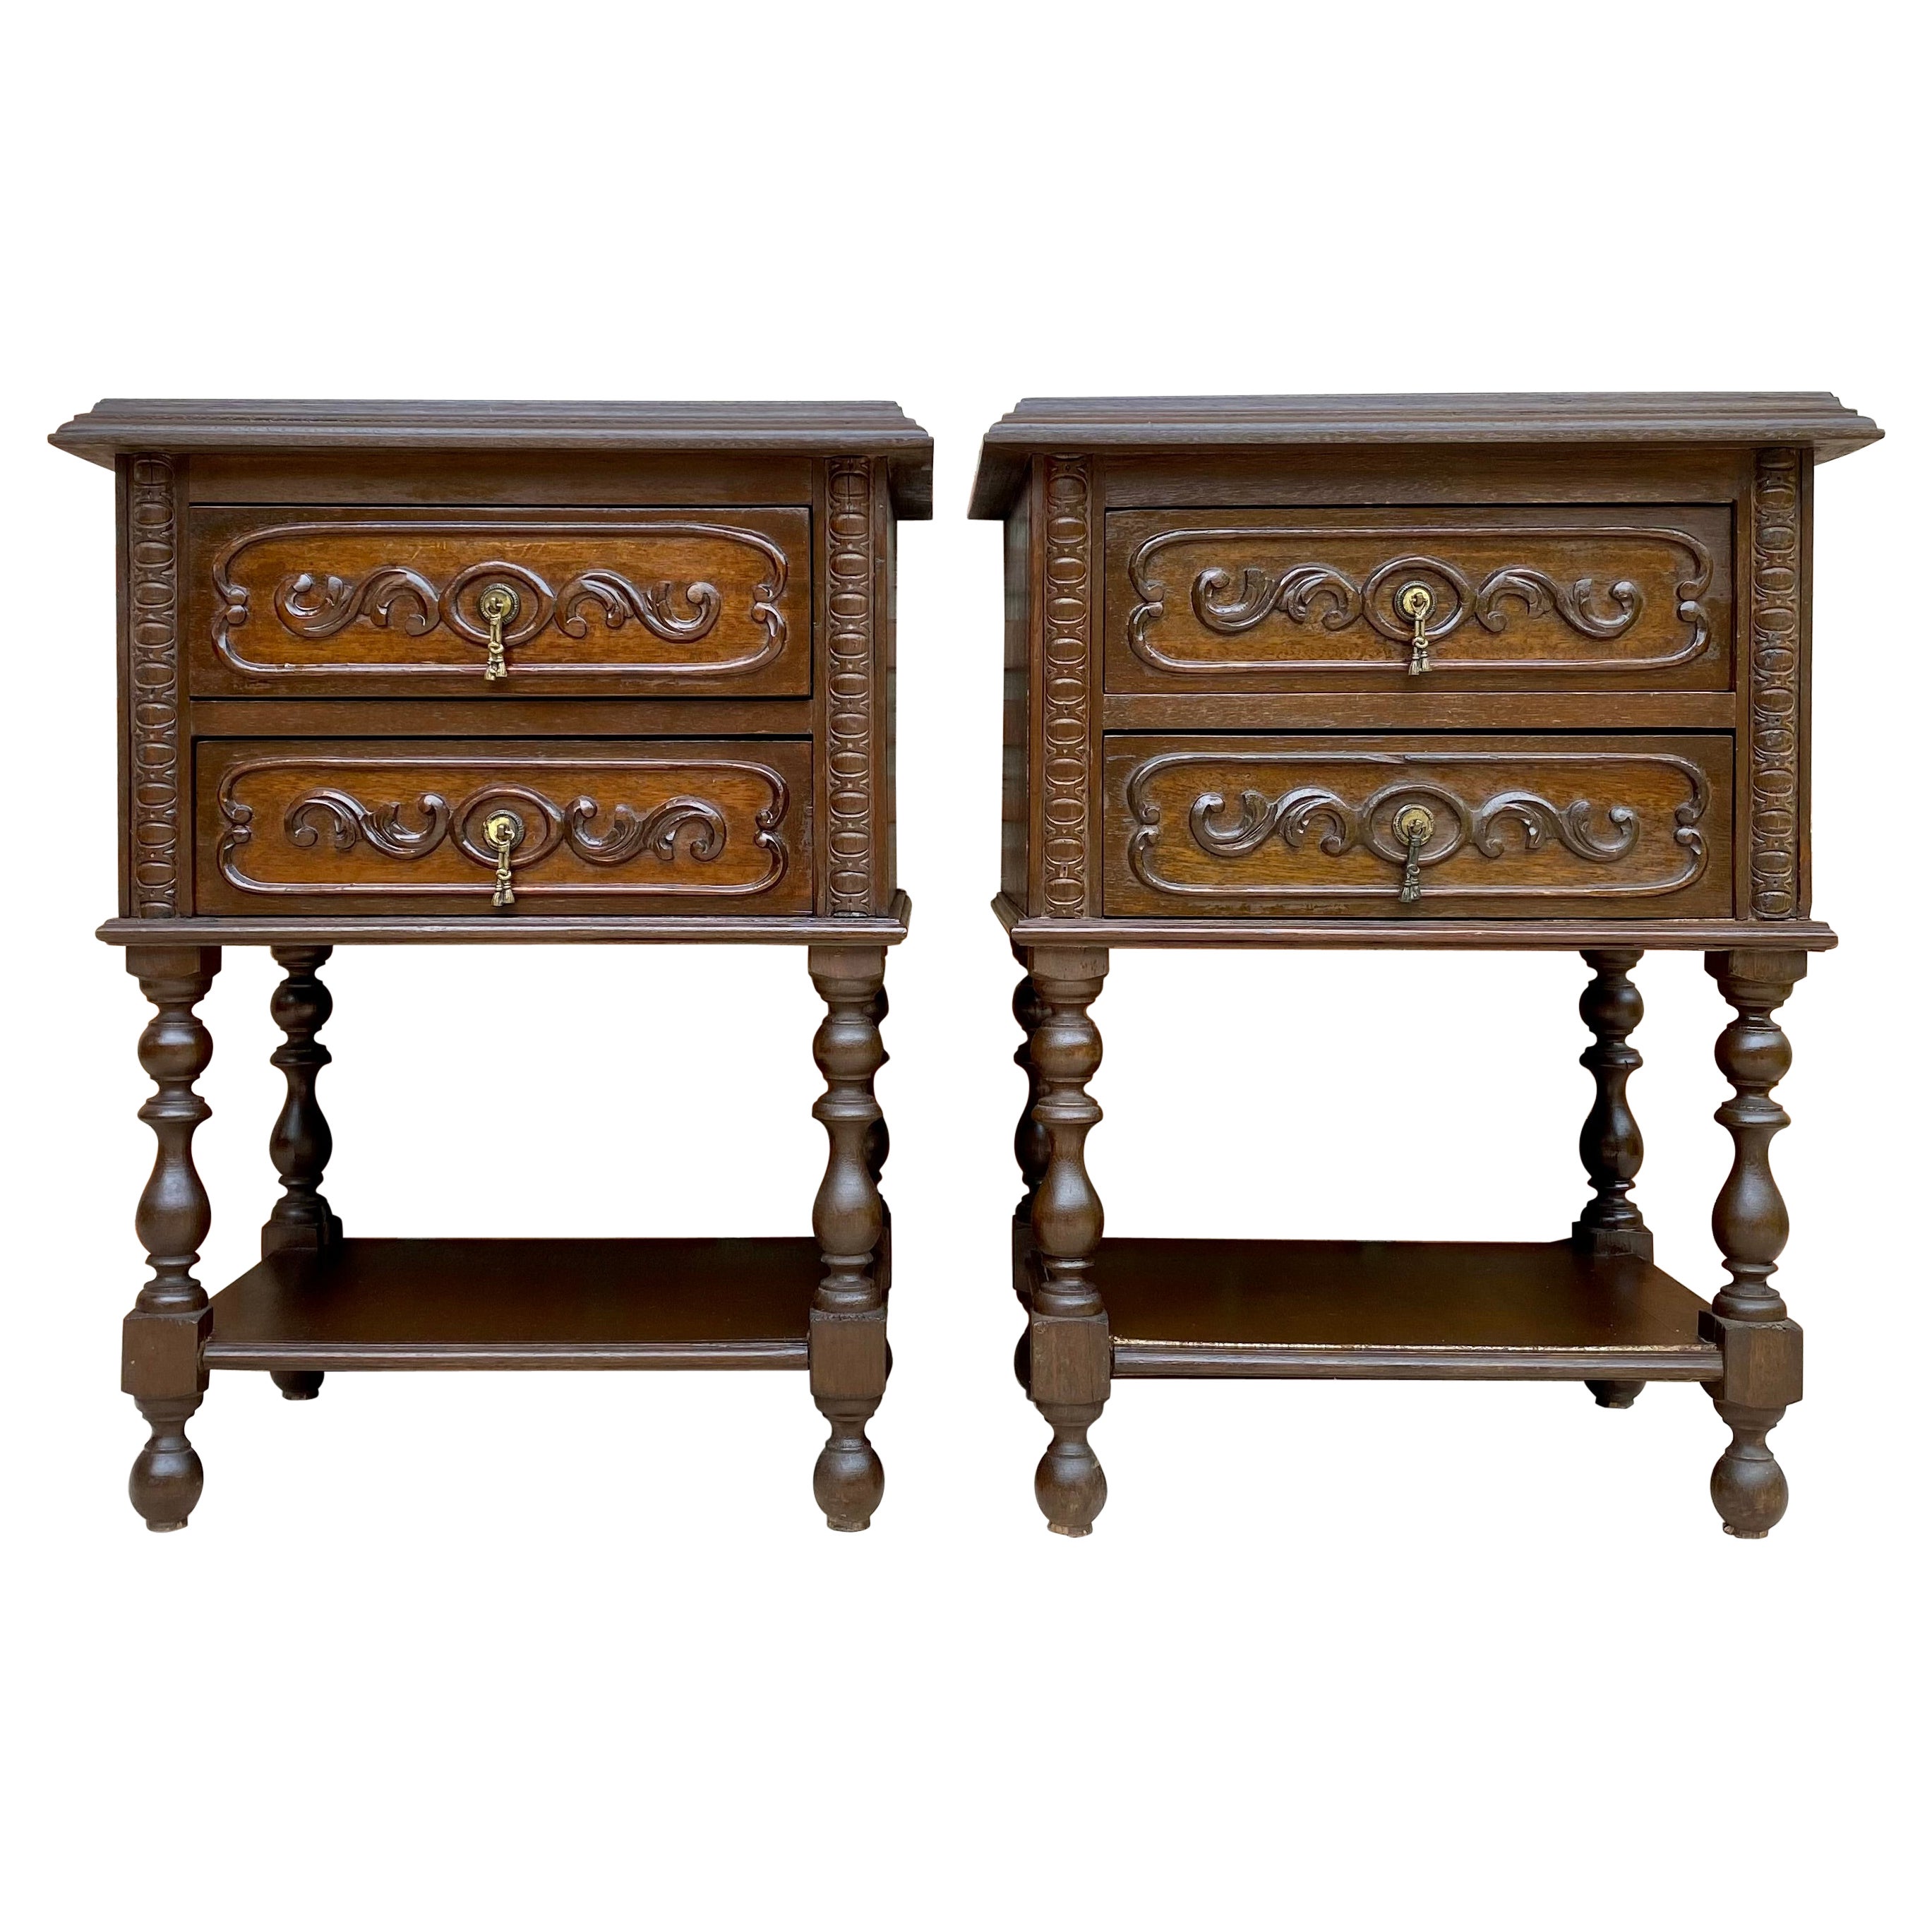 French Nightstands In Carved Walnut Two Drawers And Shelf, Set Of 2